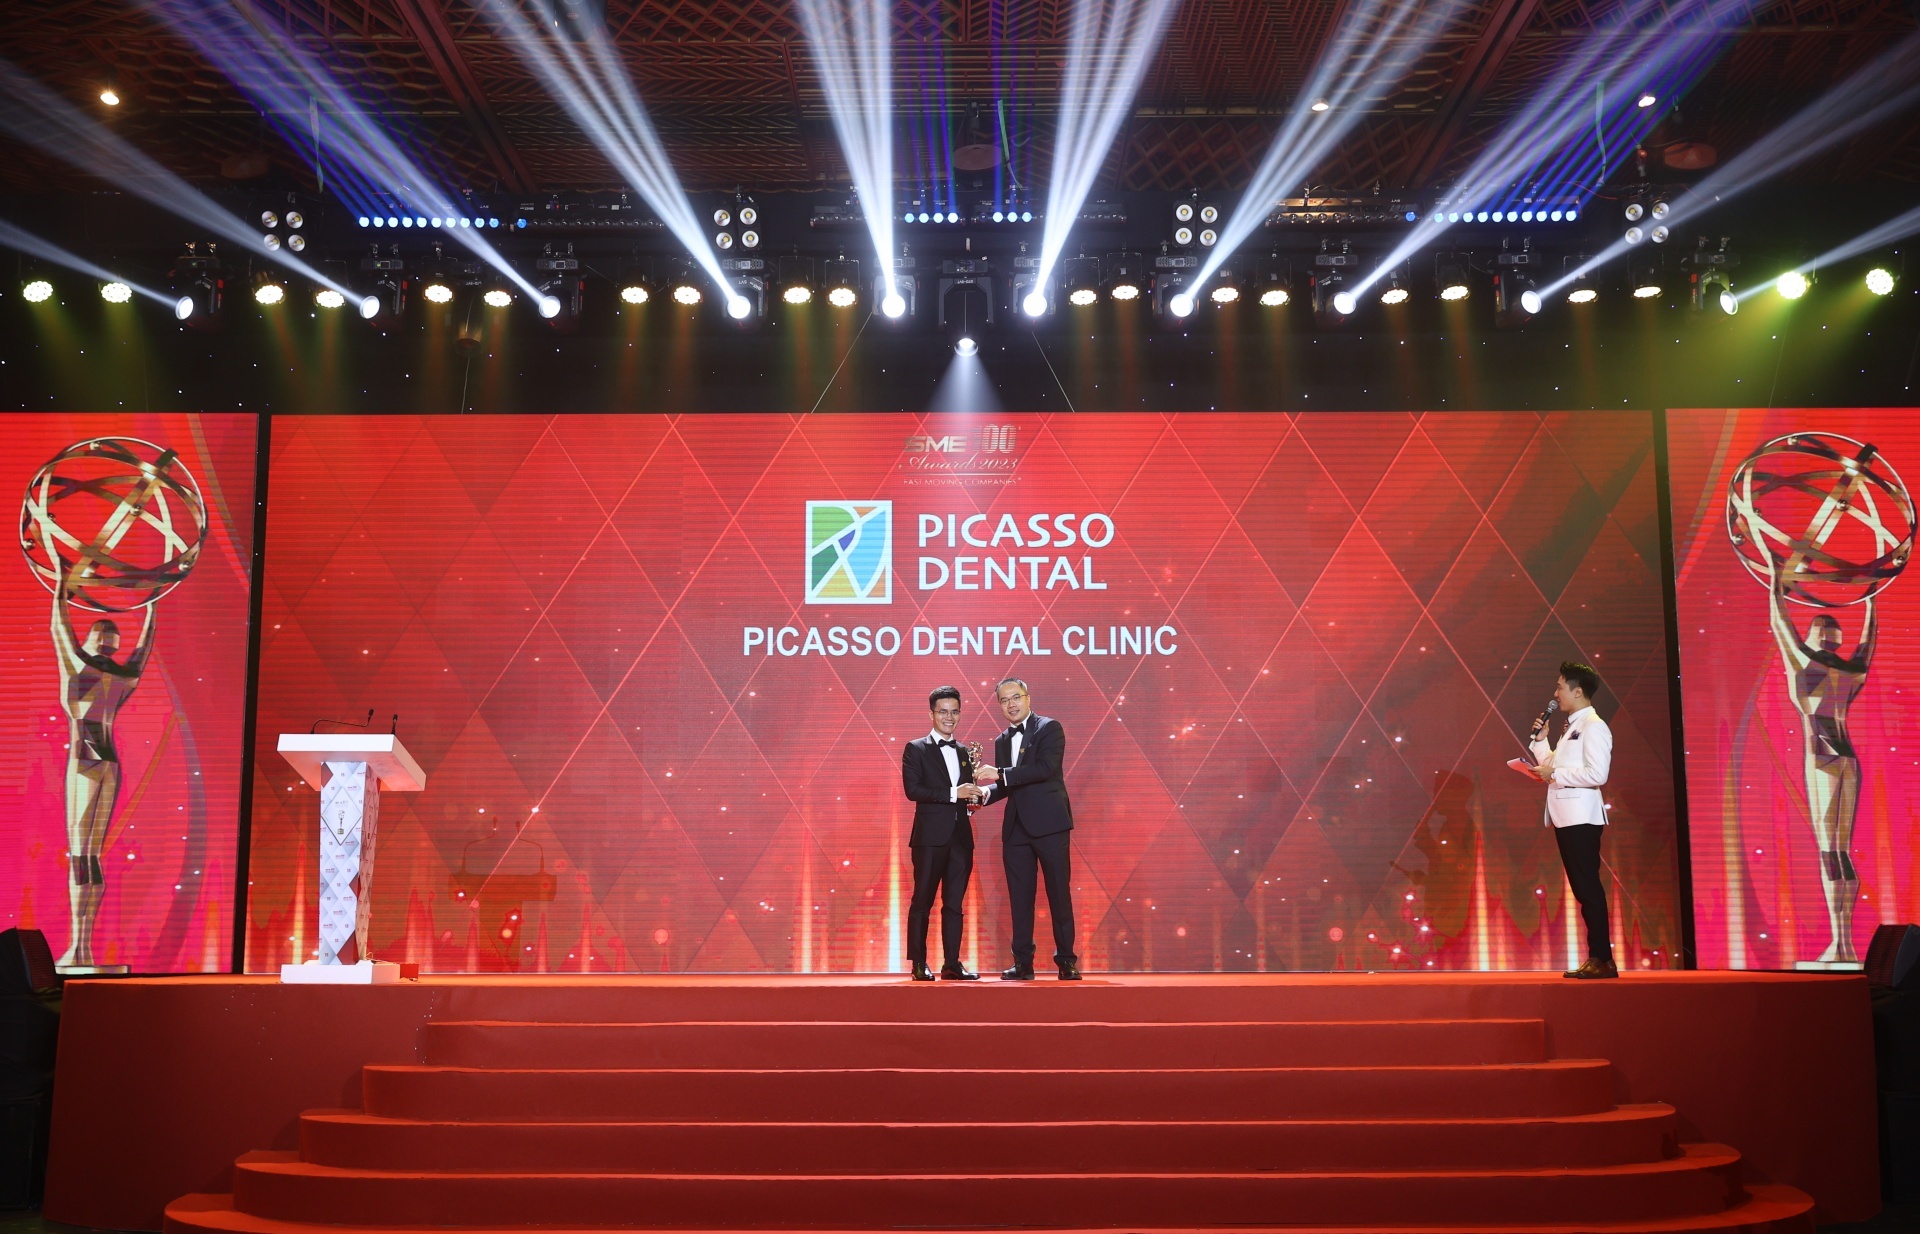 picasso dental clinic affirming leading position in the dental industry